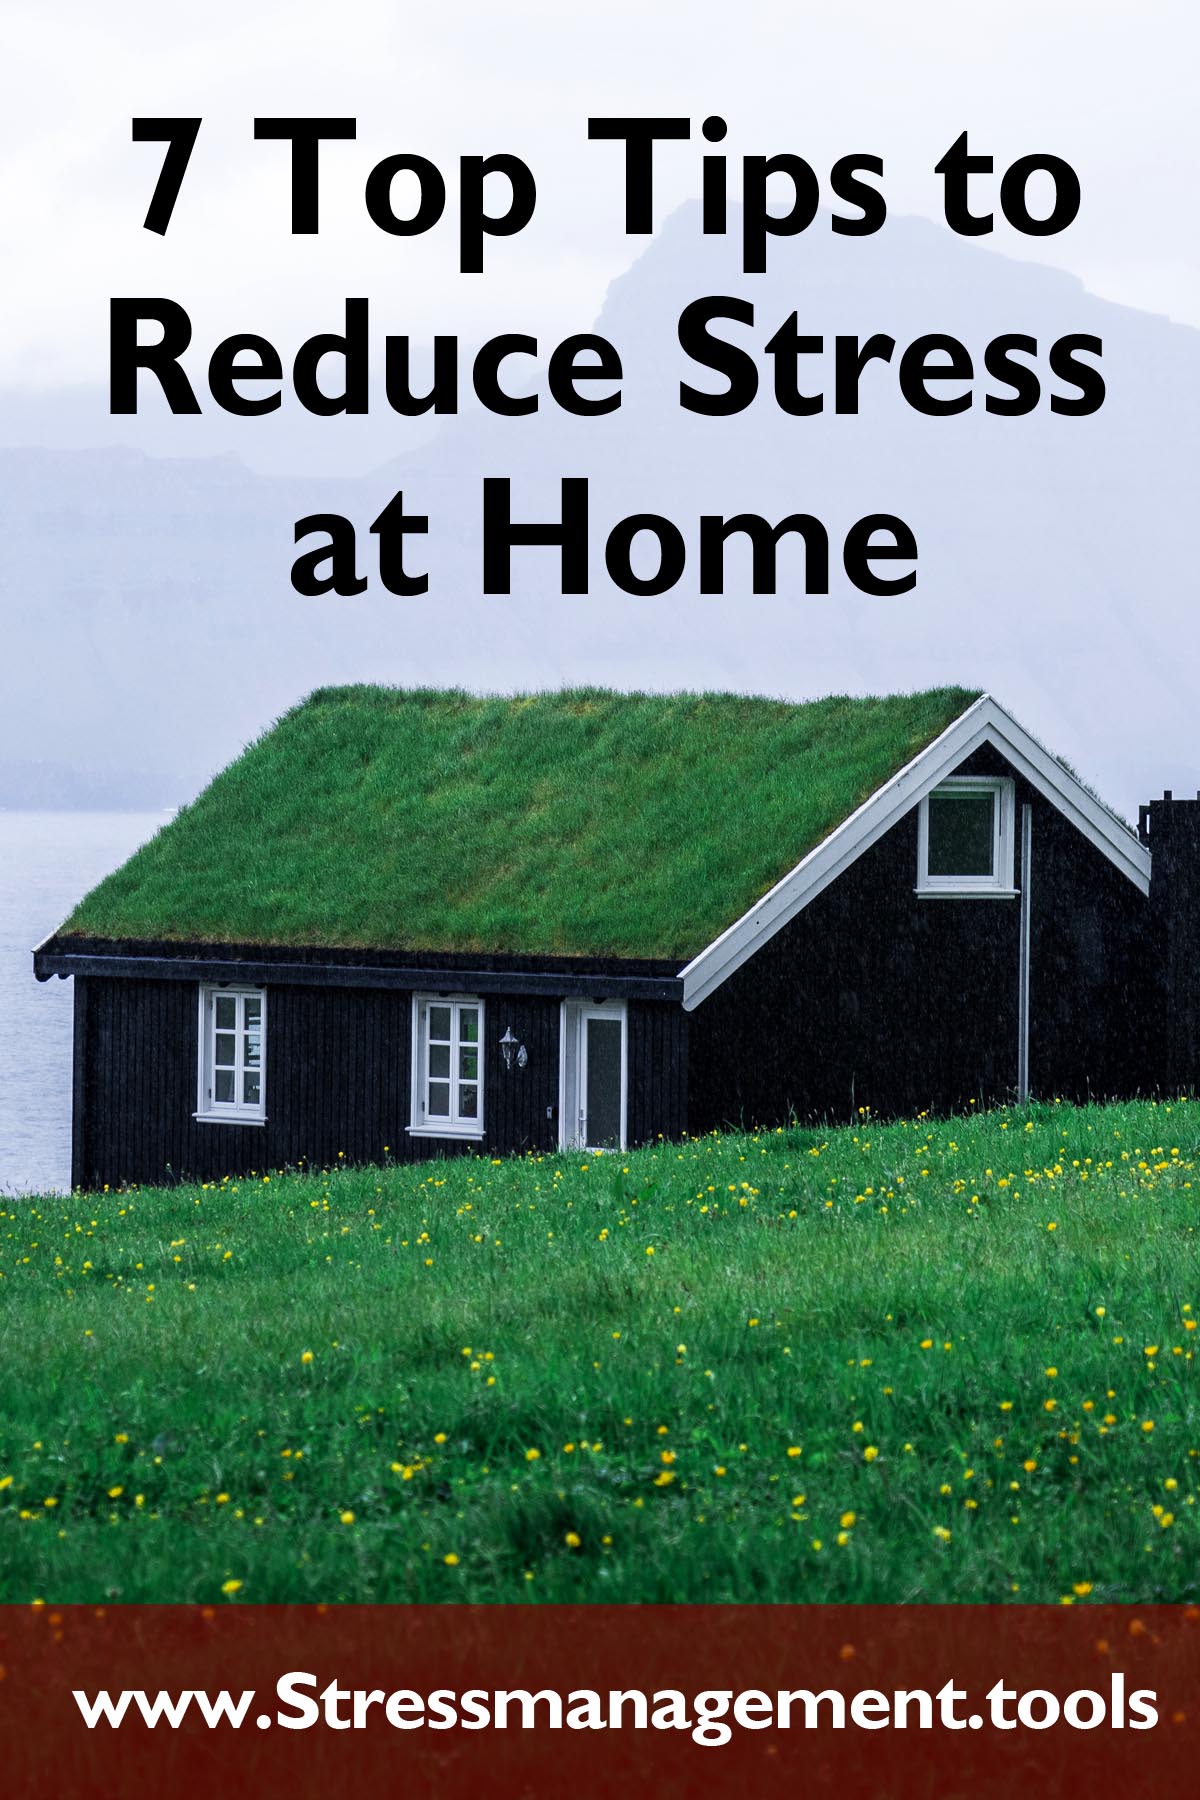 7 Top Tips To Reduce Stress at Home